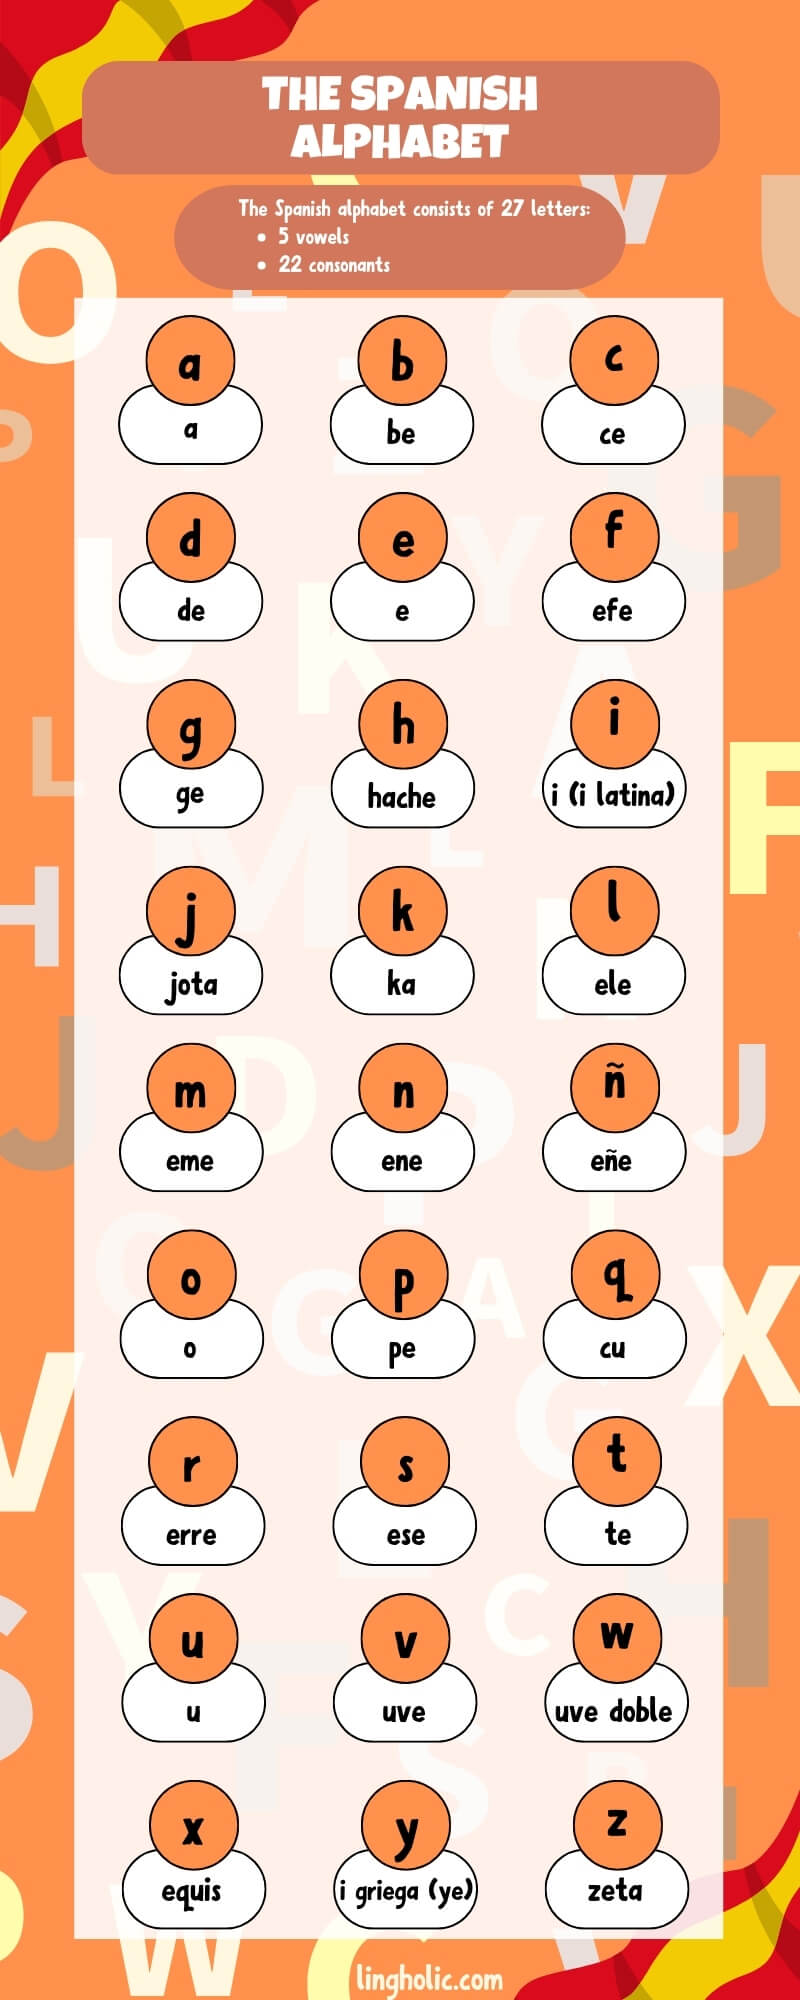 Infographic of the Spanish Alphabet with Pronunciation